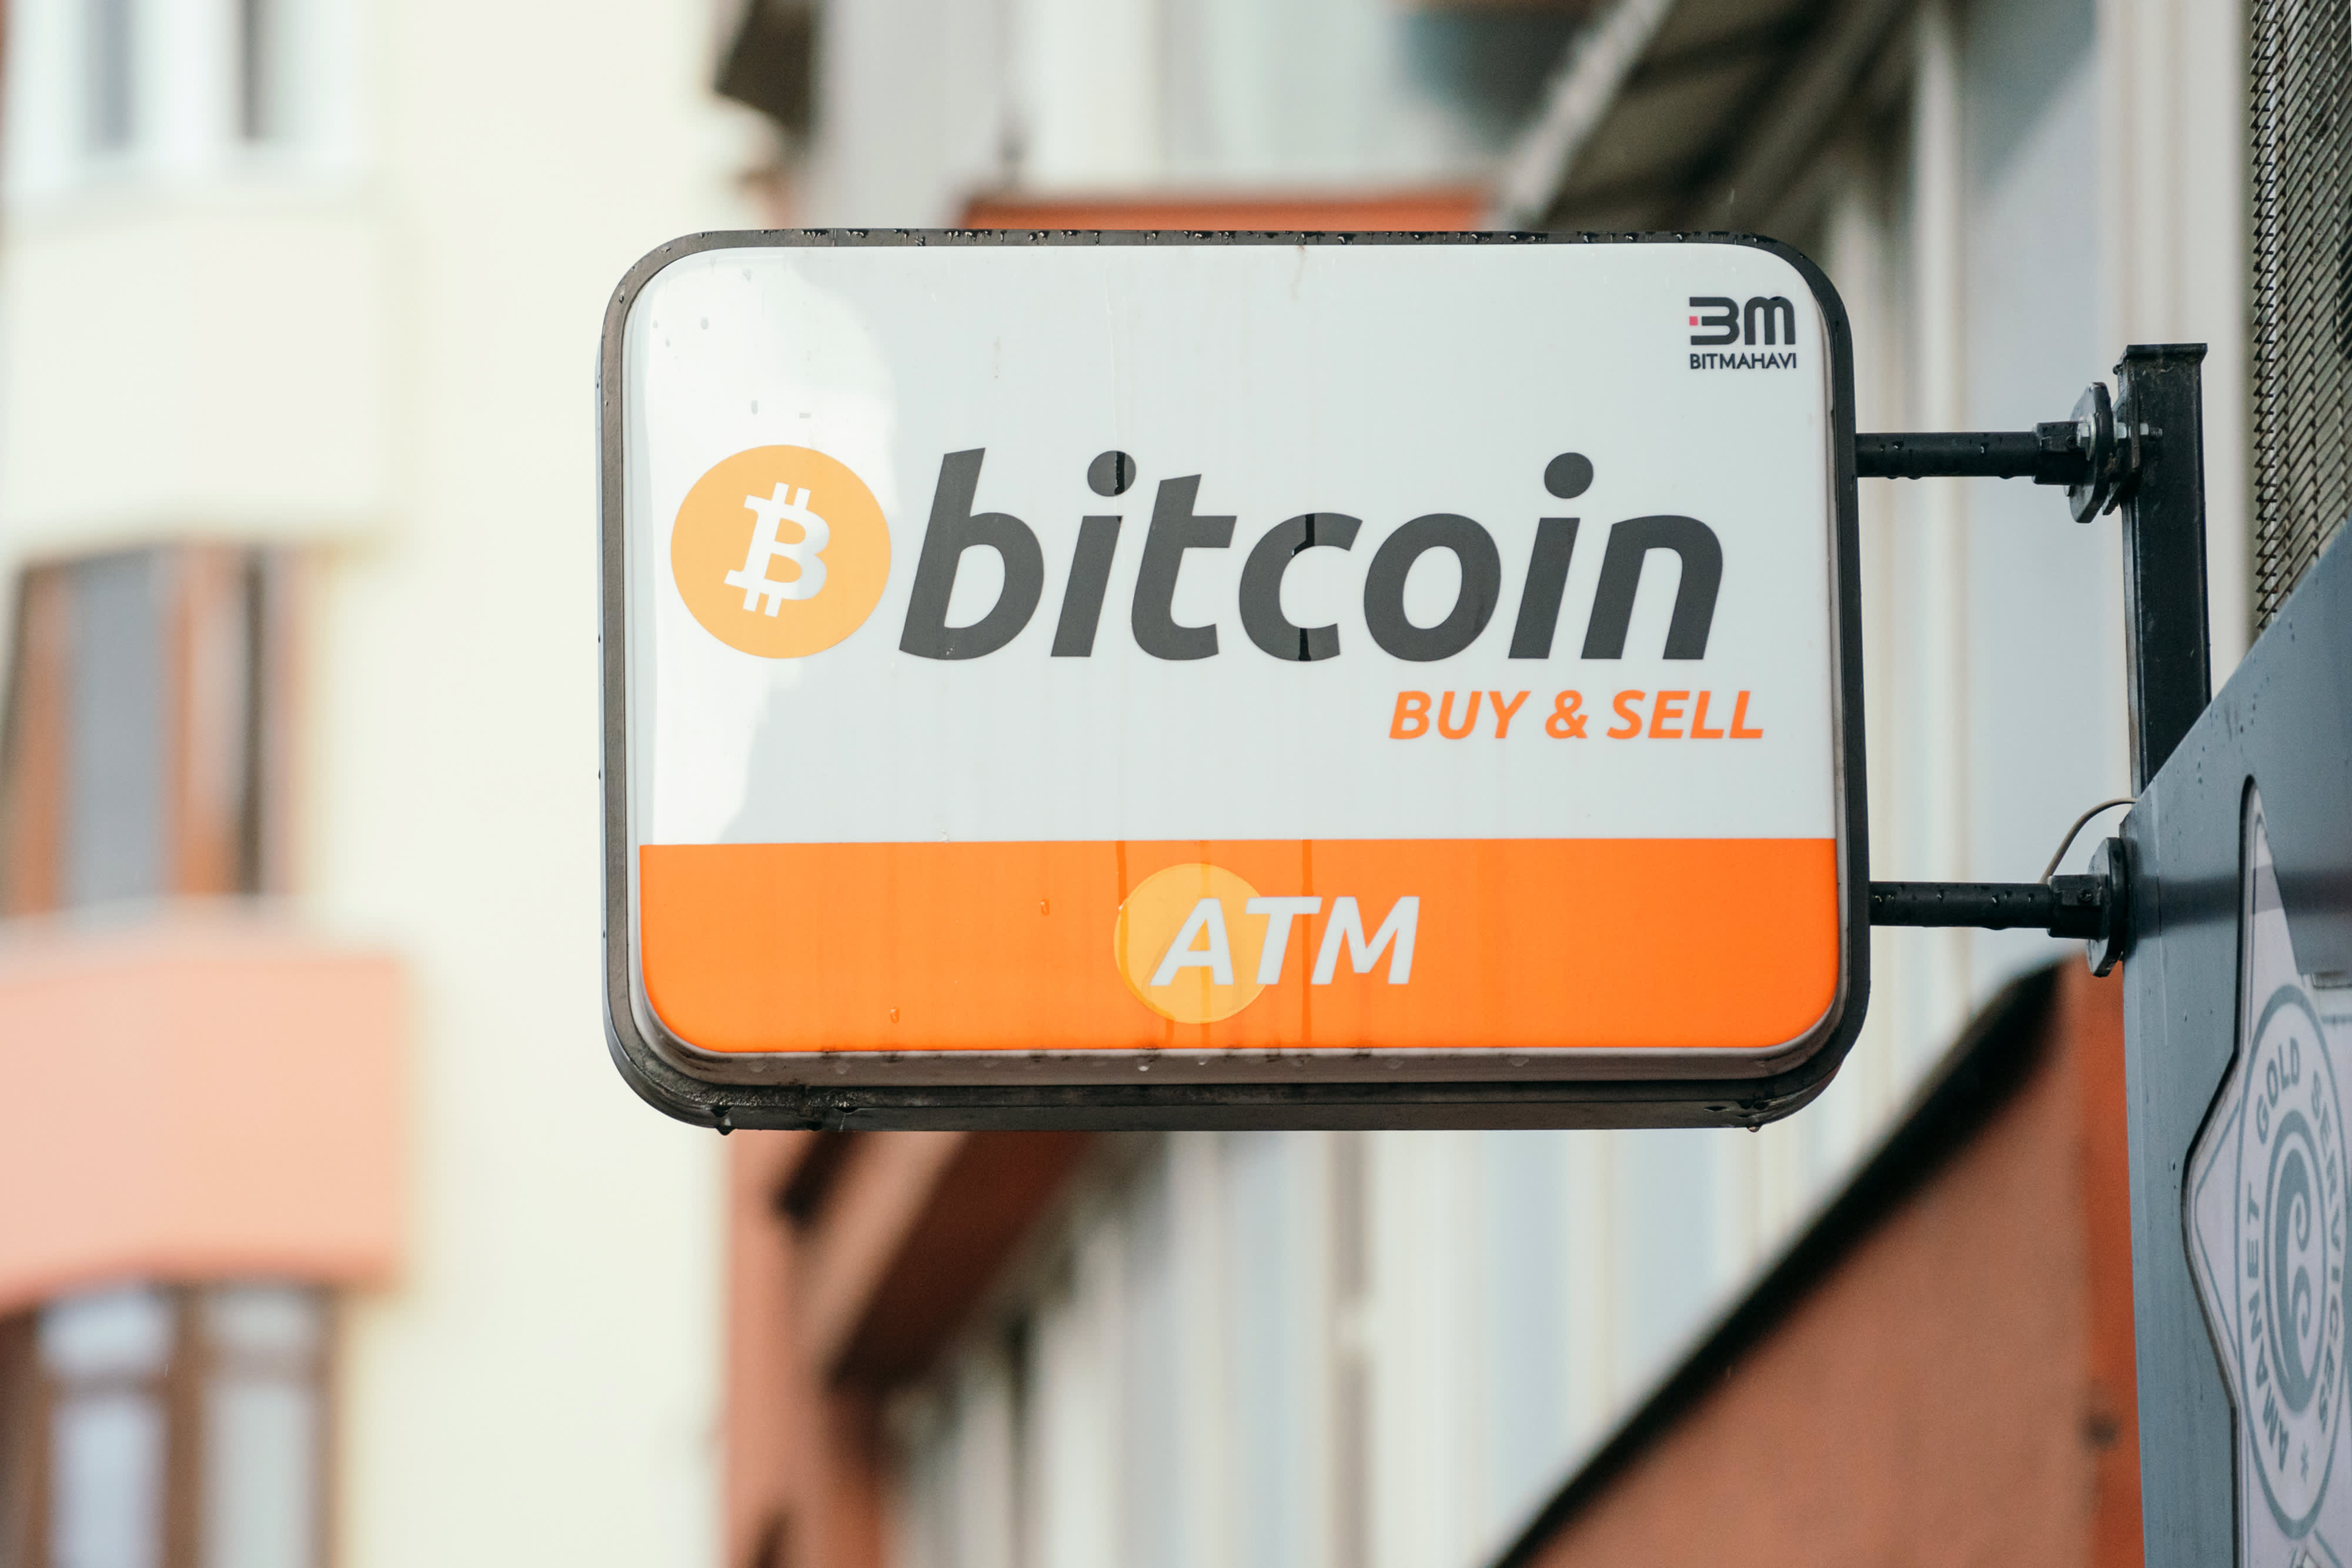 Bitcoin still has a big opportunity in payments despite 60% drop this year and choppy waters ahead